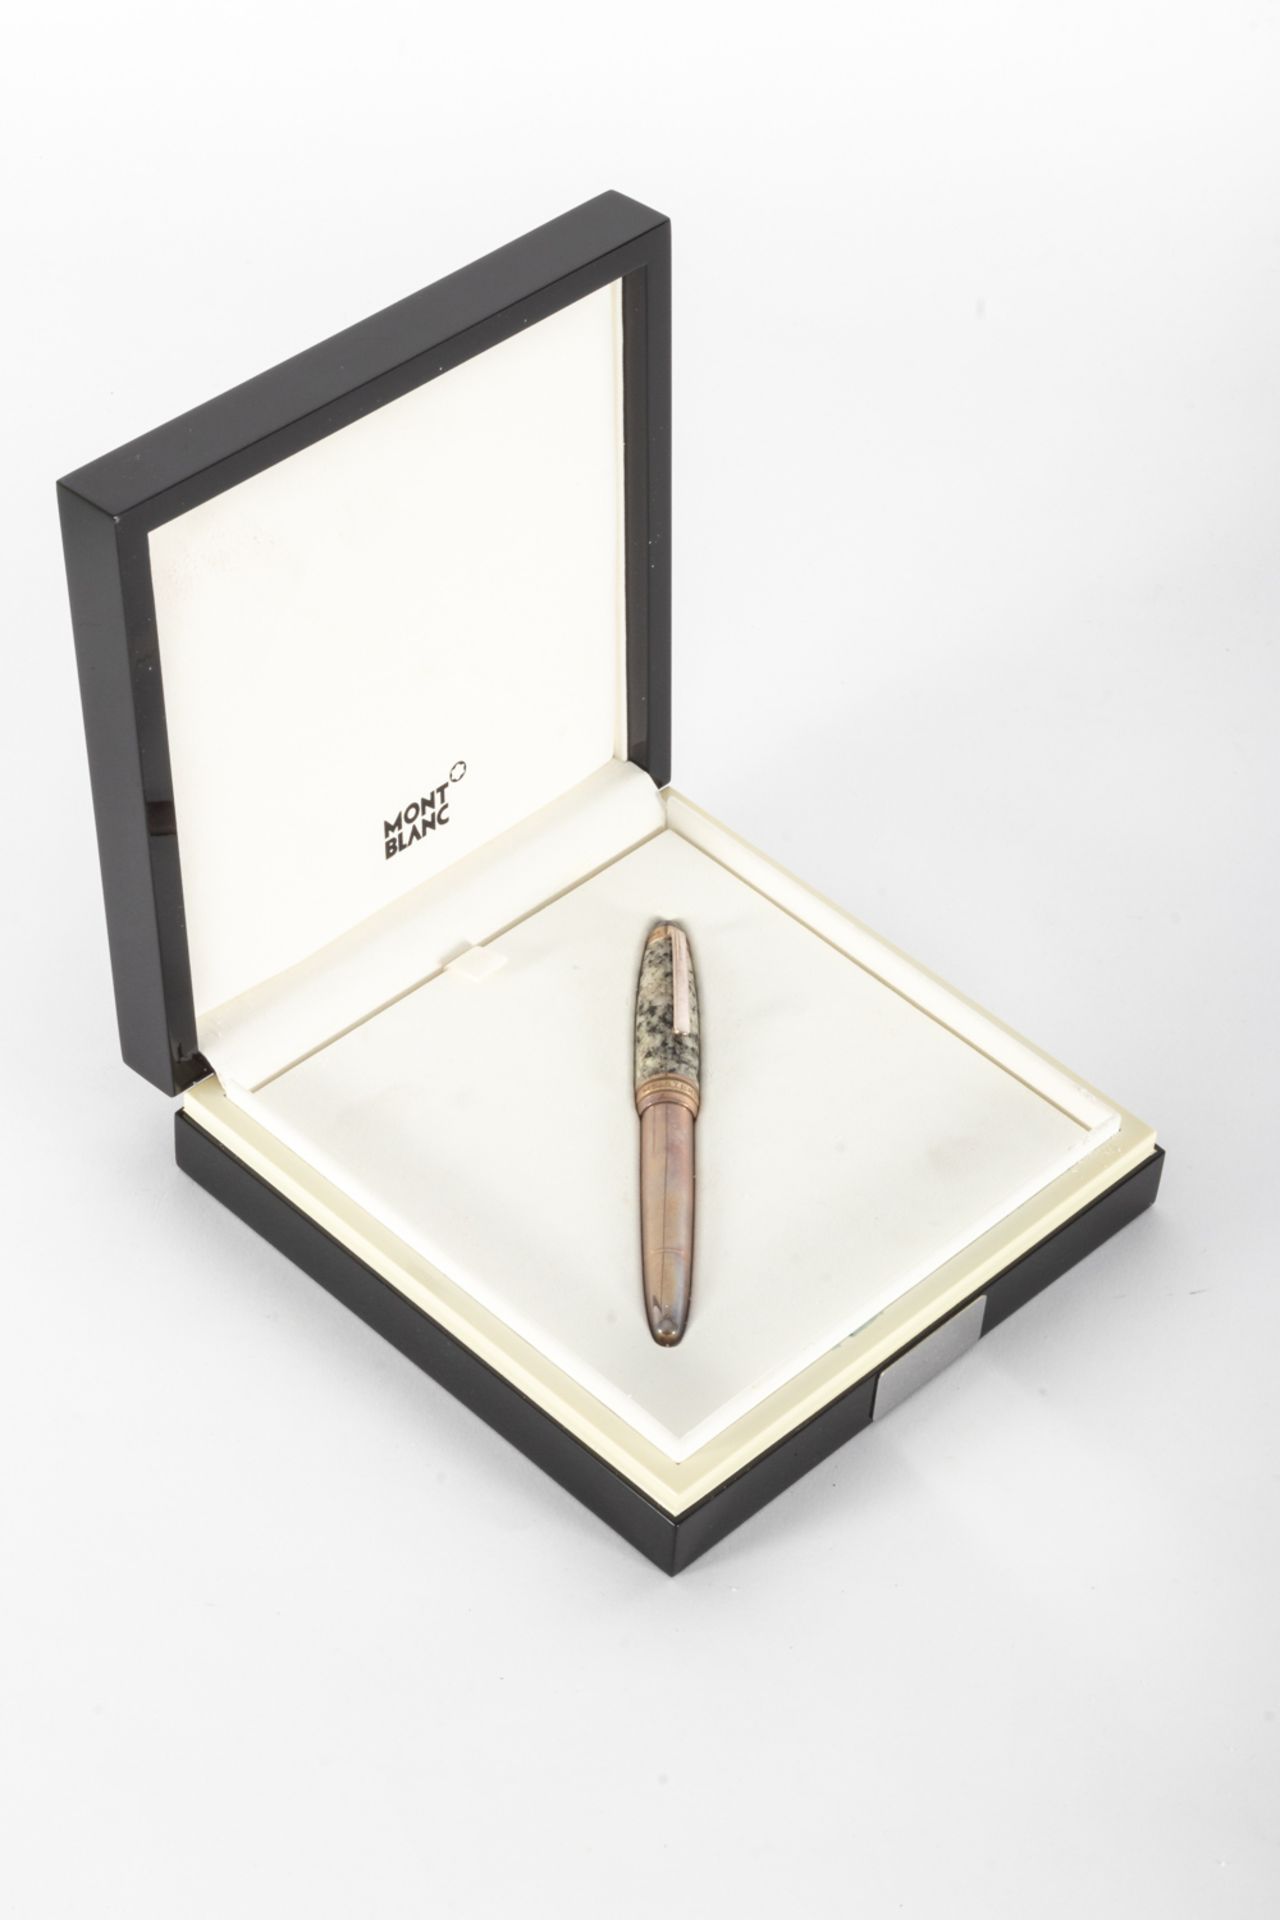 Montblanc fountain pen "Soulmakers for 100 years" collection "Granite" model, 2006. 